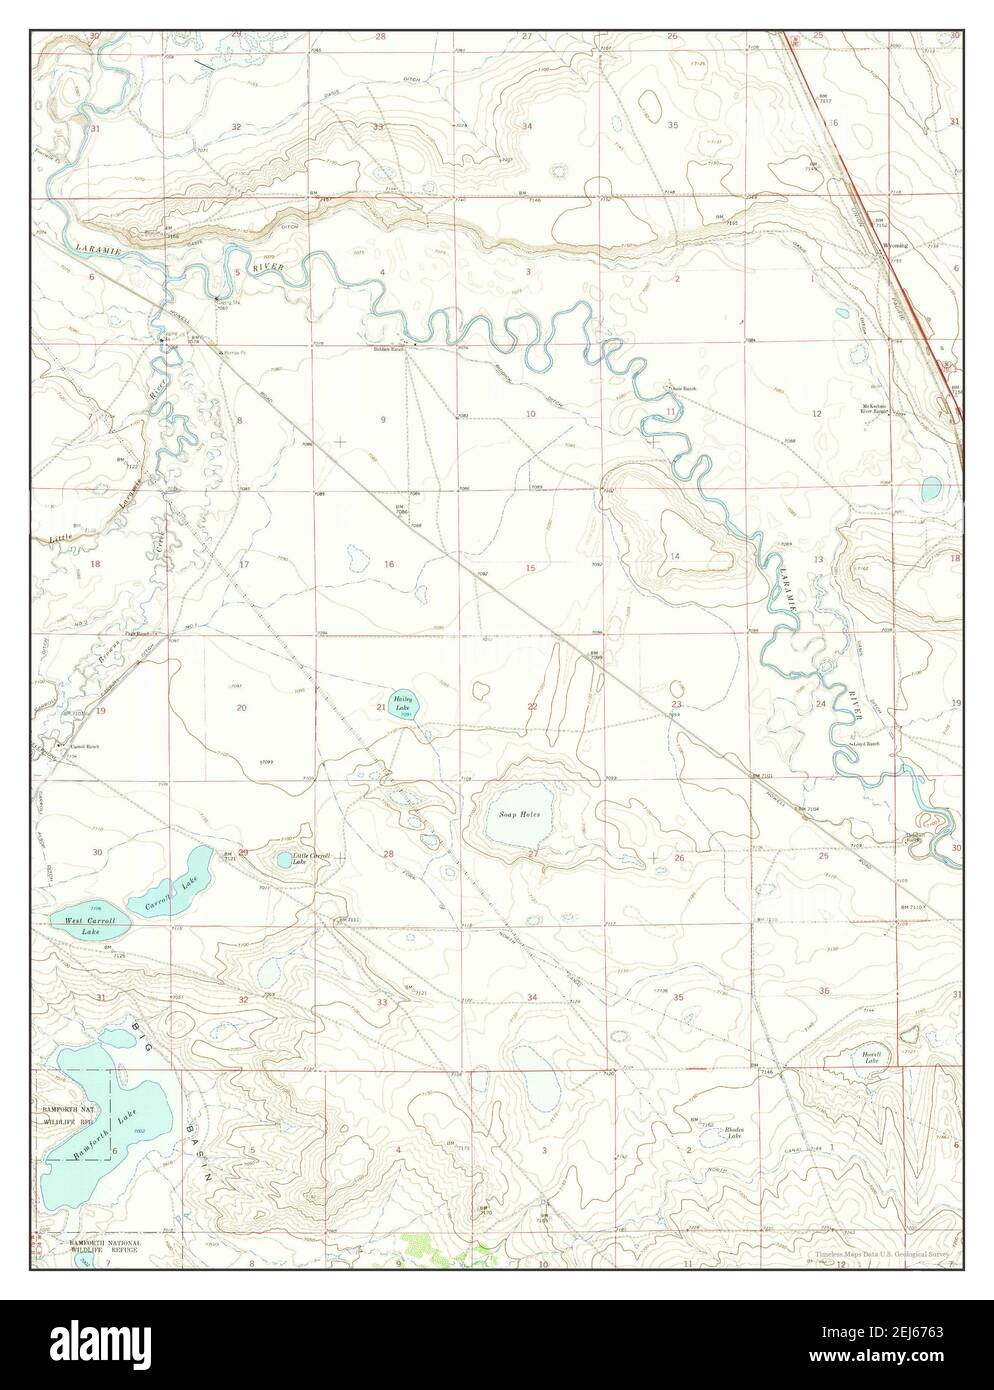 Bambforth Lake, Wyoming, map 1963, 1:24000, United States of America by Timeless Maps, data U.S. Geological Survey Foto Stock